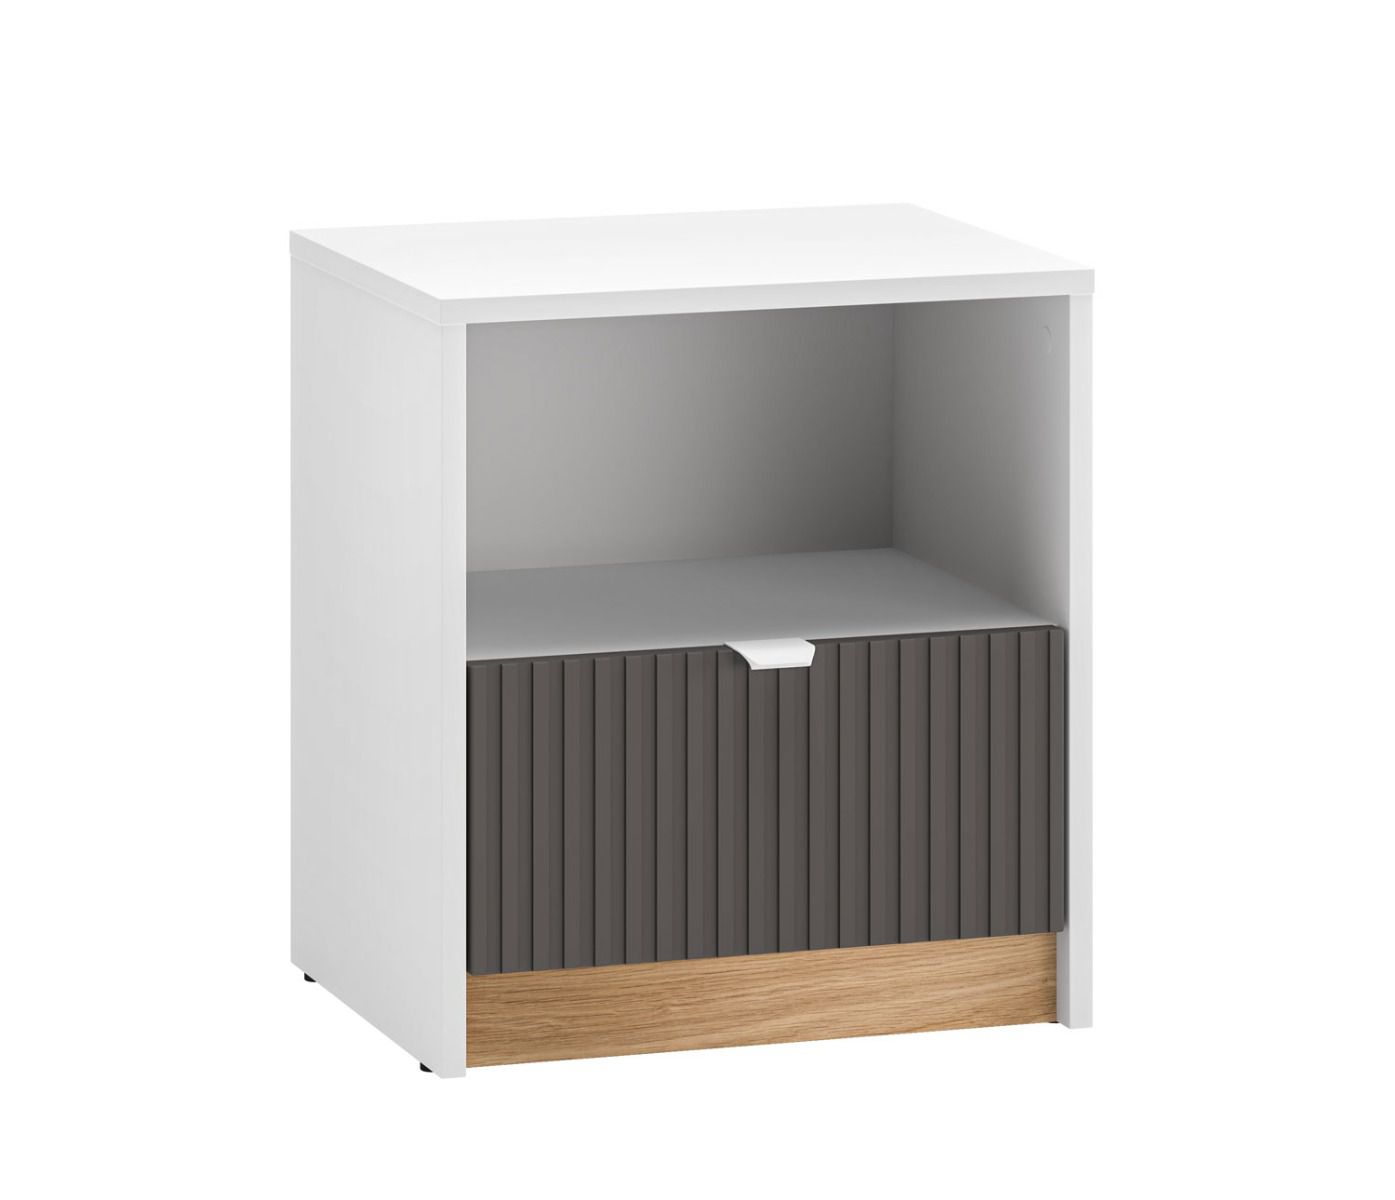 Bedside chest of drawers in the sleek and simple design Mackinac 09, color: white / oak / graphite matt, soft-close system, dimensions: 48 x 43 x 34 cm, with one compartment and one drawer